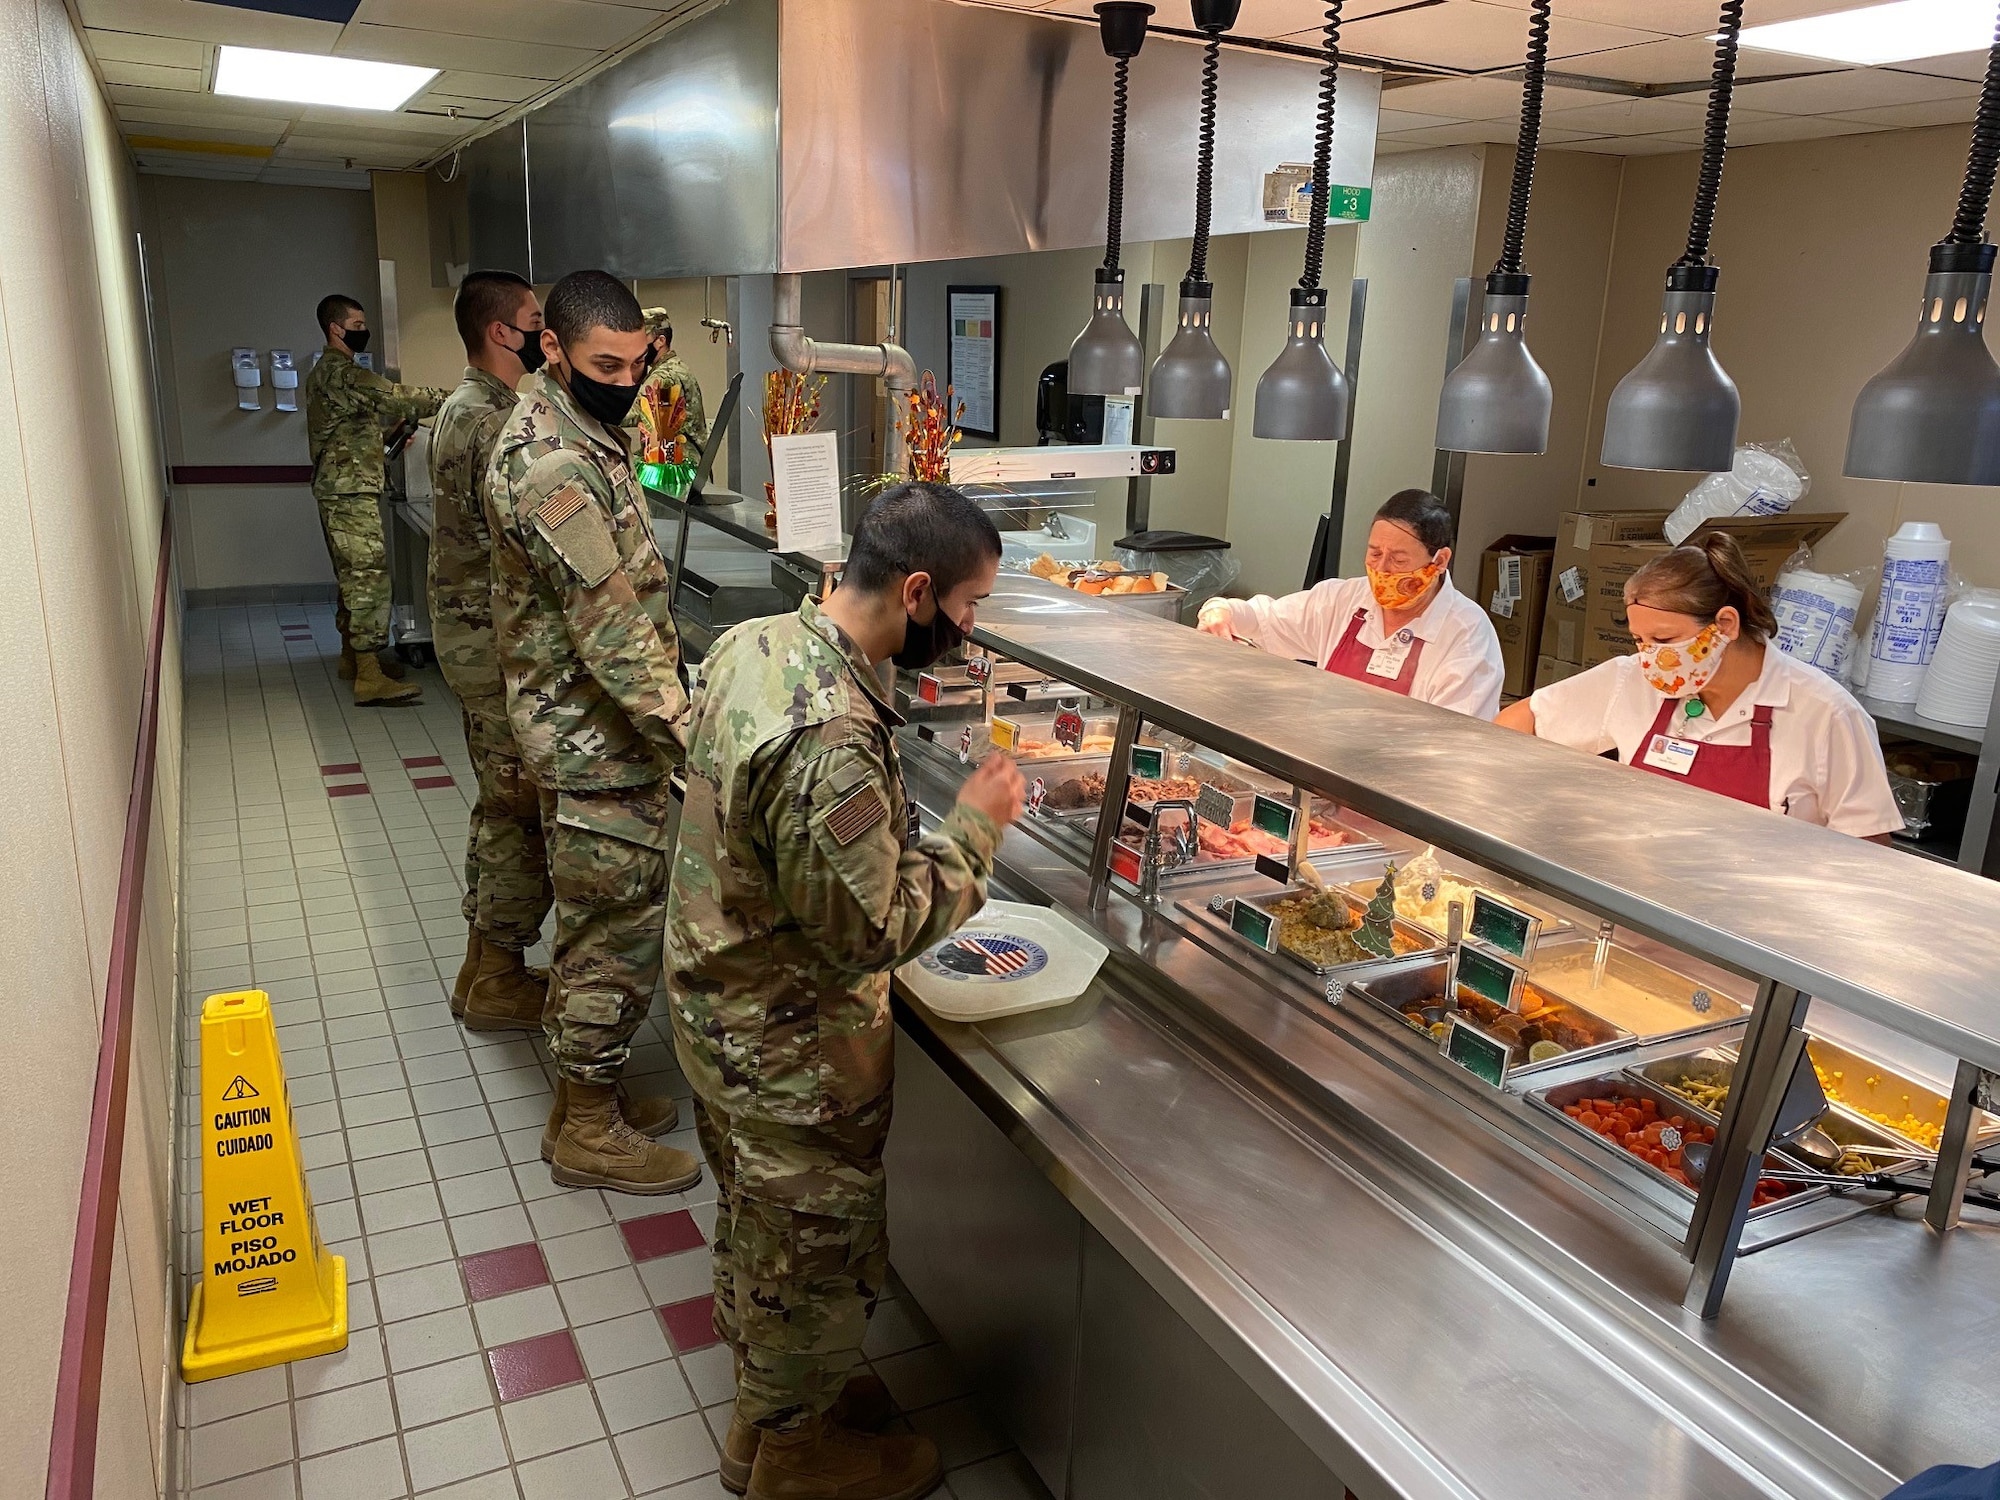 Airmen who graduated from Basic Military Training on Nov. 25 enjoy their first Thanksgiving meal in uniform at Joint Base San Antonio-Lackland, Texas, on Nov. 26.